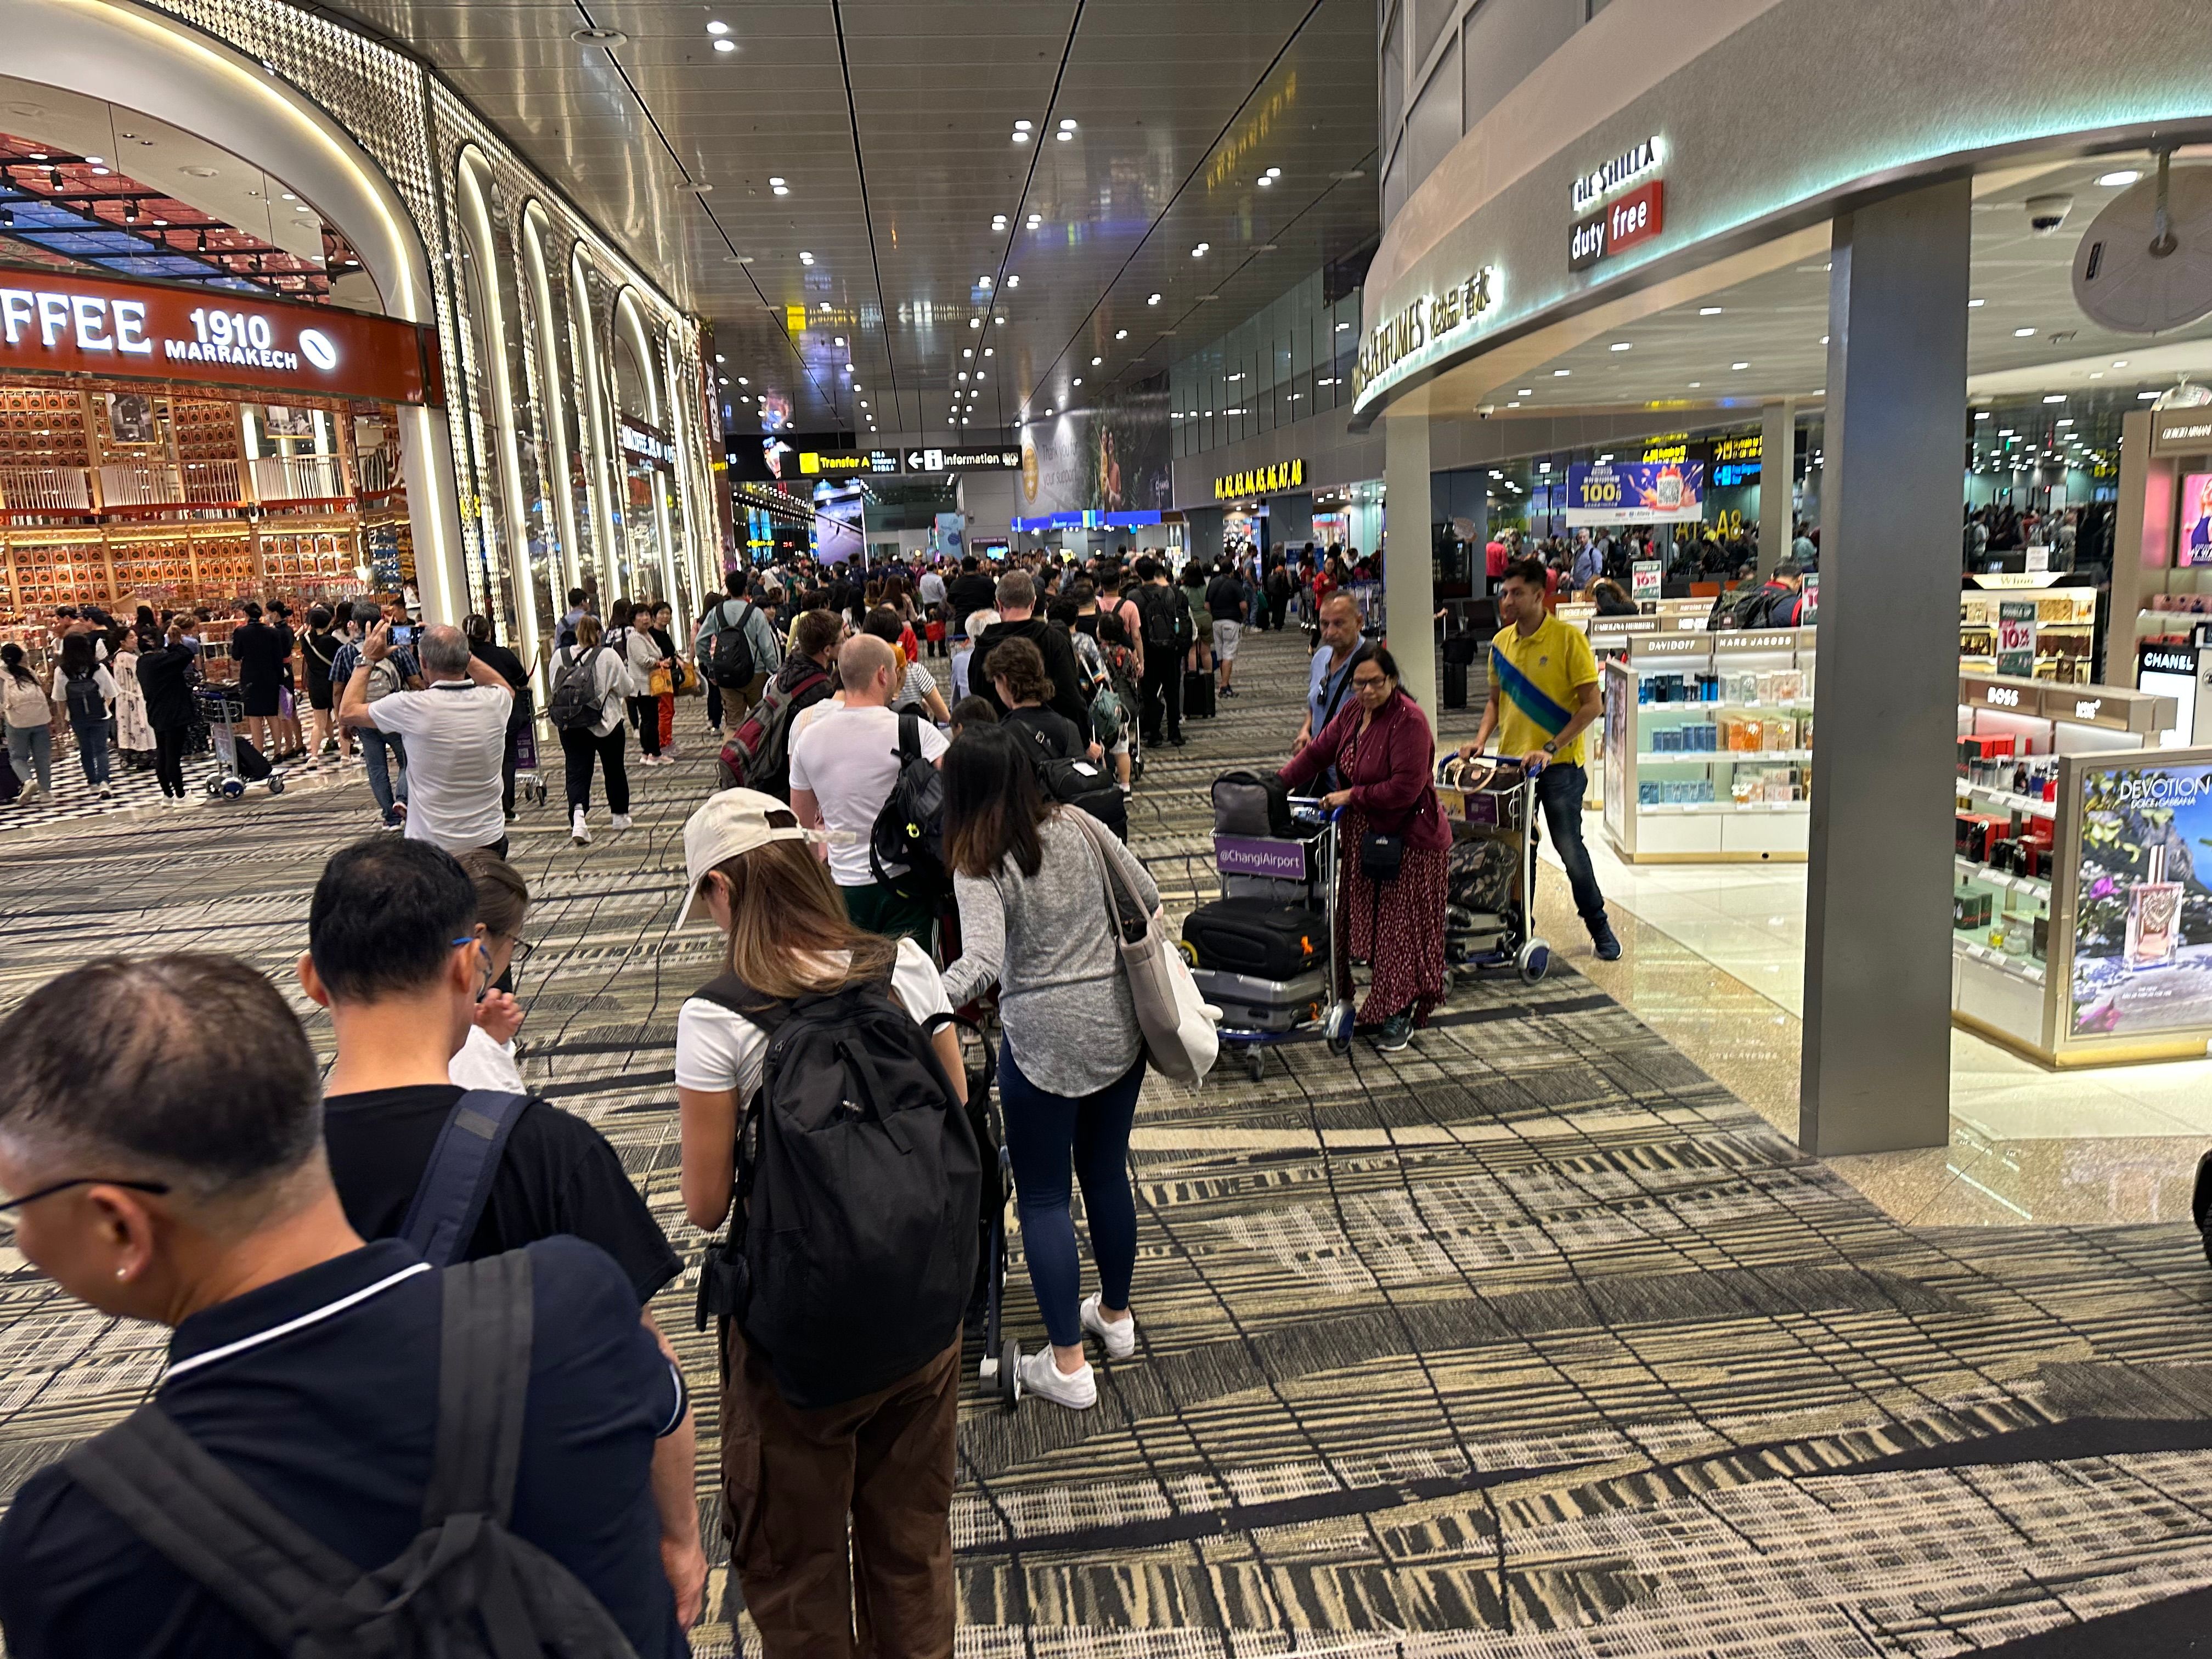 Waiting in line for security at Changi Airport in Singapore.